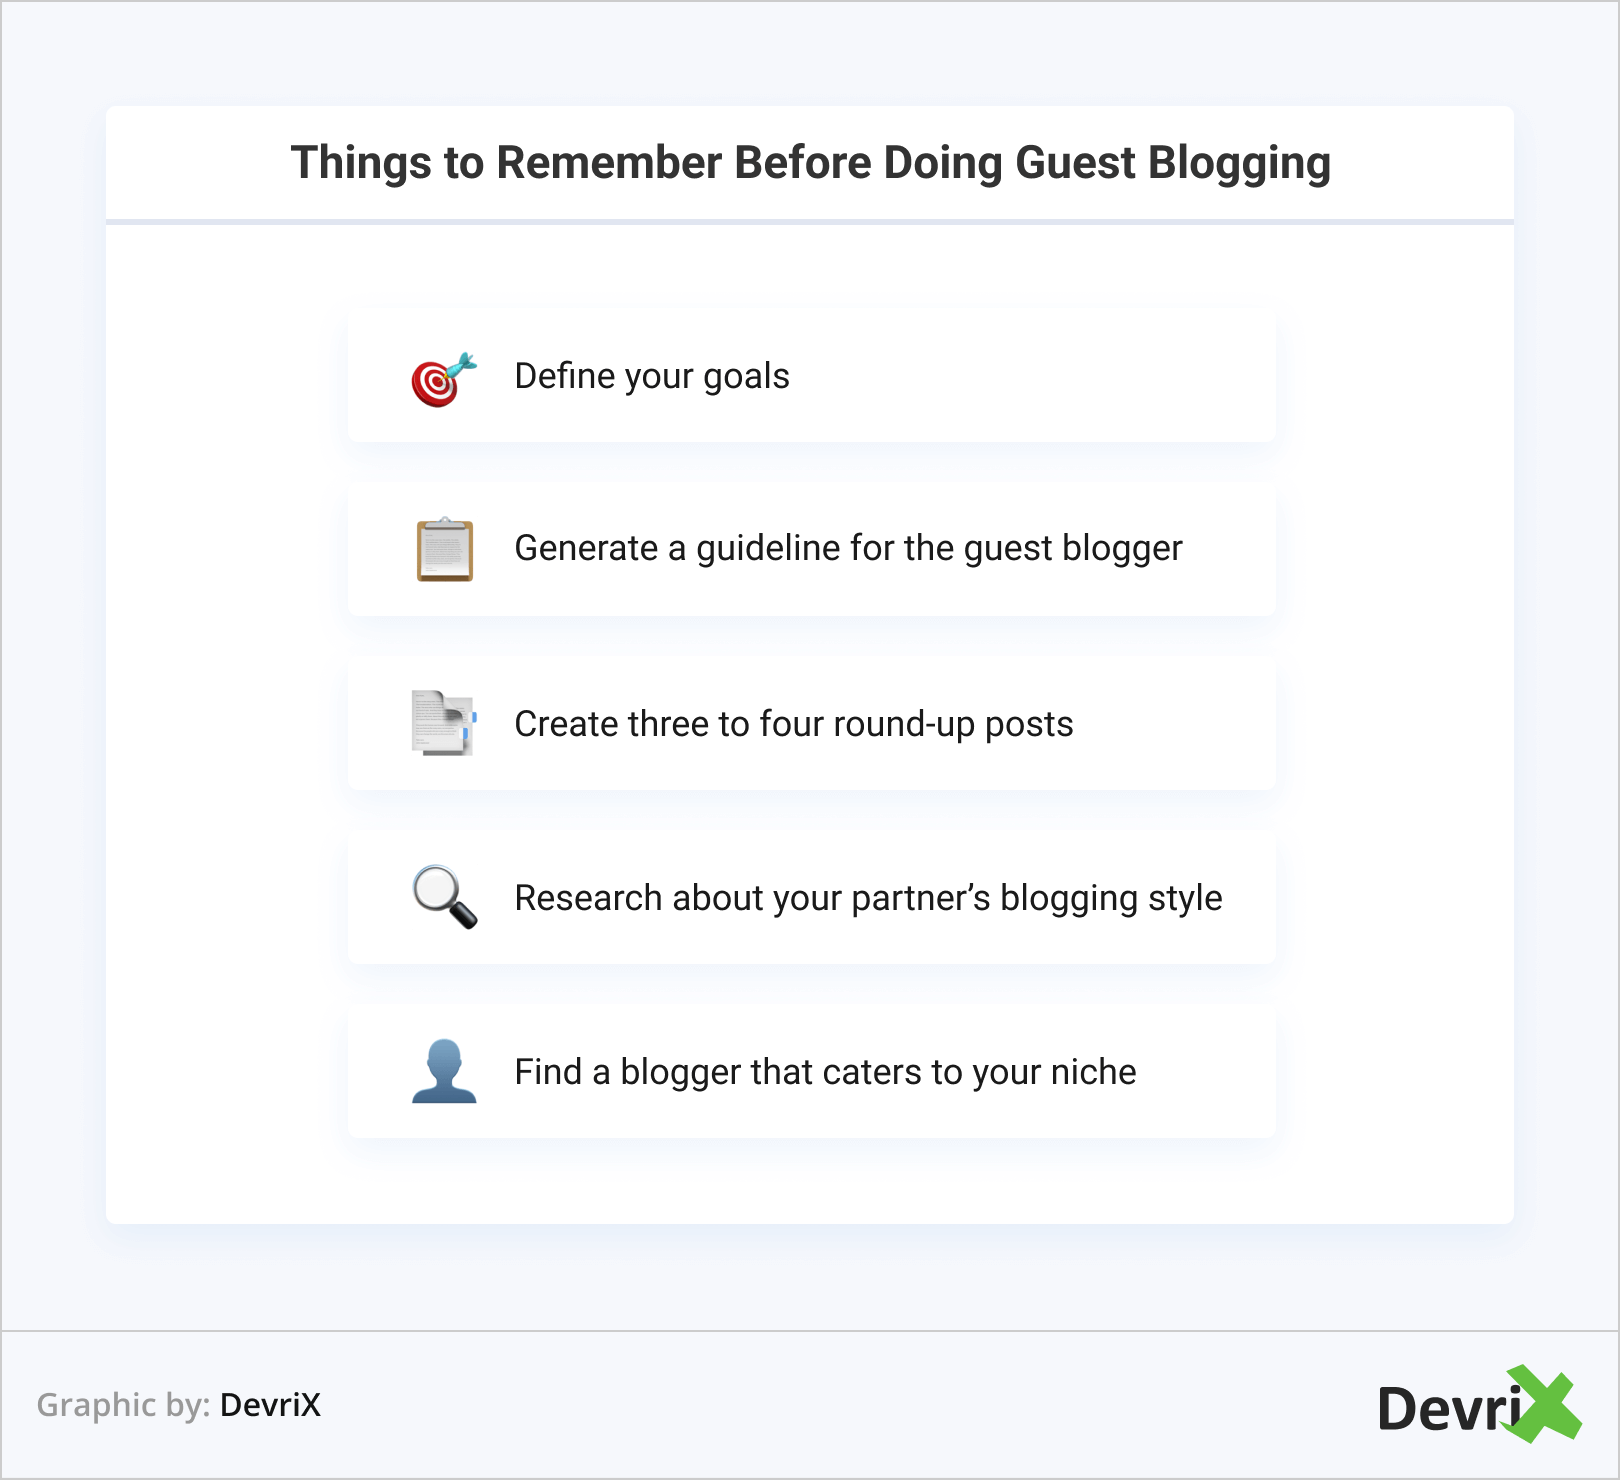 Things to Remember Before Doing Guest Blogging